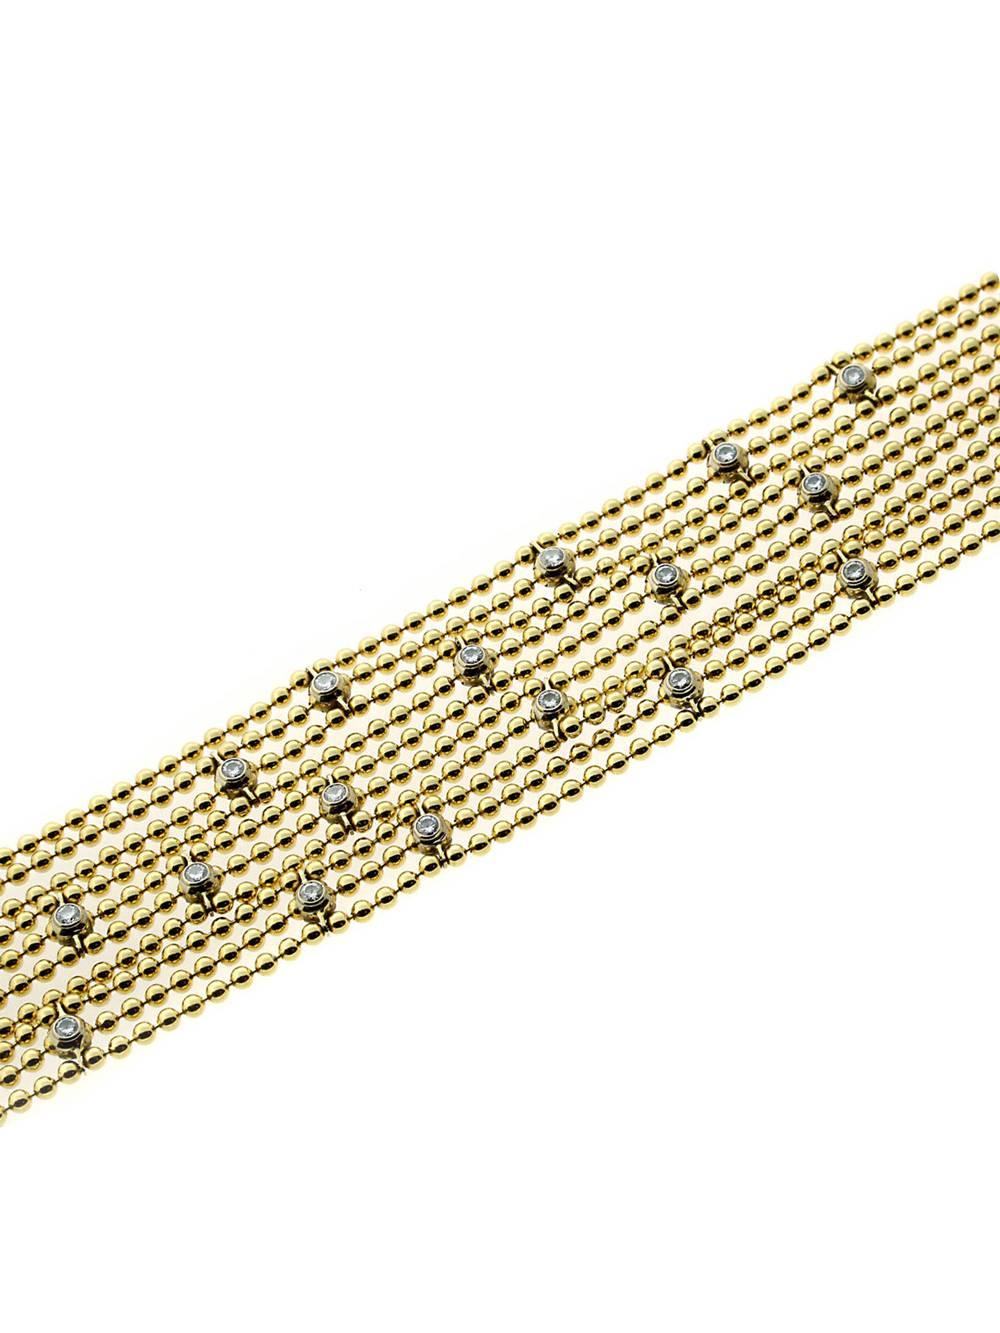 Cartier’s Draperie de Decollette Diamond Bracelet is aptly named, because this piece doesn’t so much fasten around the wrist as it does drape, providing a shimmering appearance which almost channels the beauty of a fine chandelier. Made of 18k